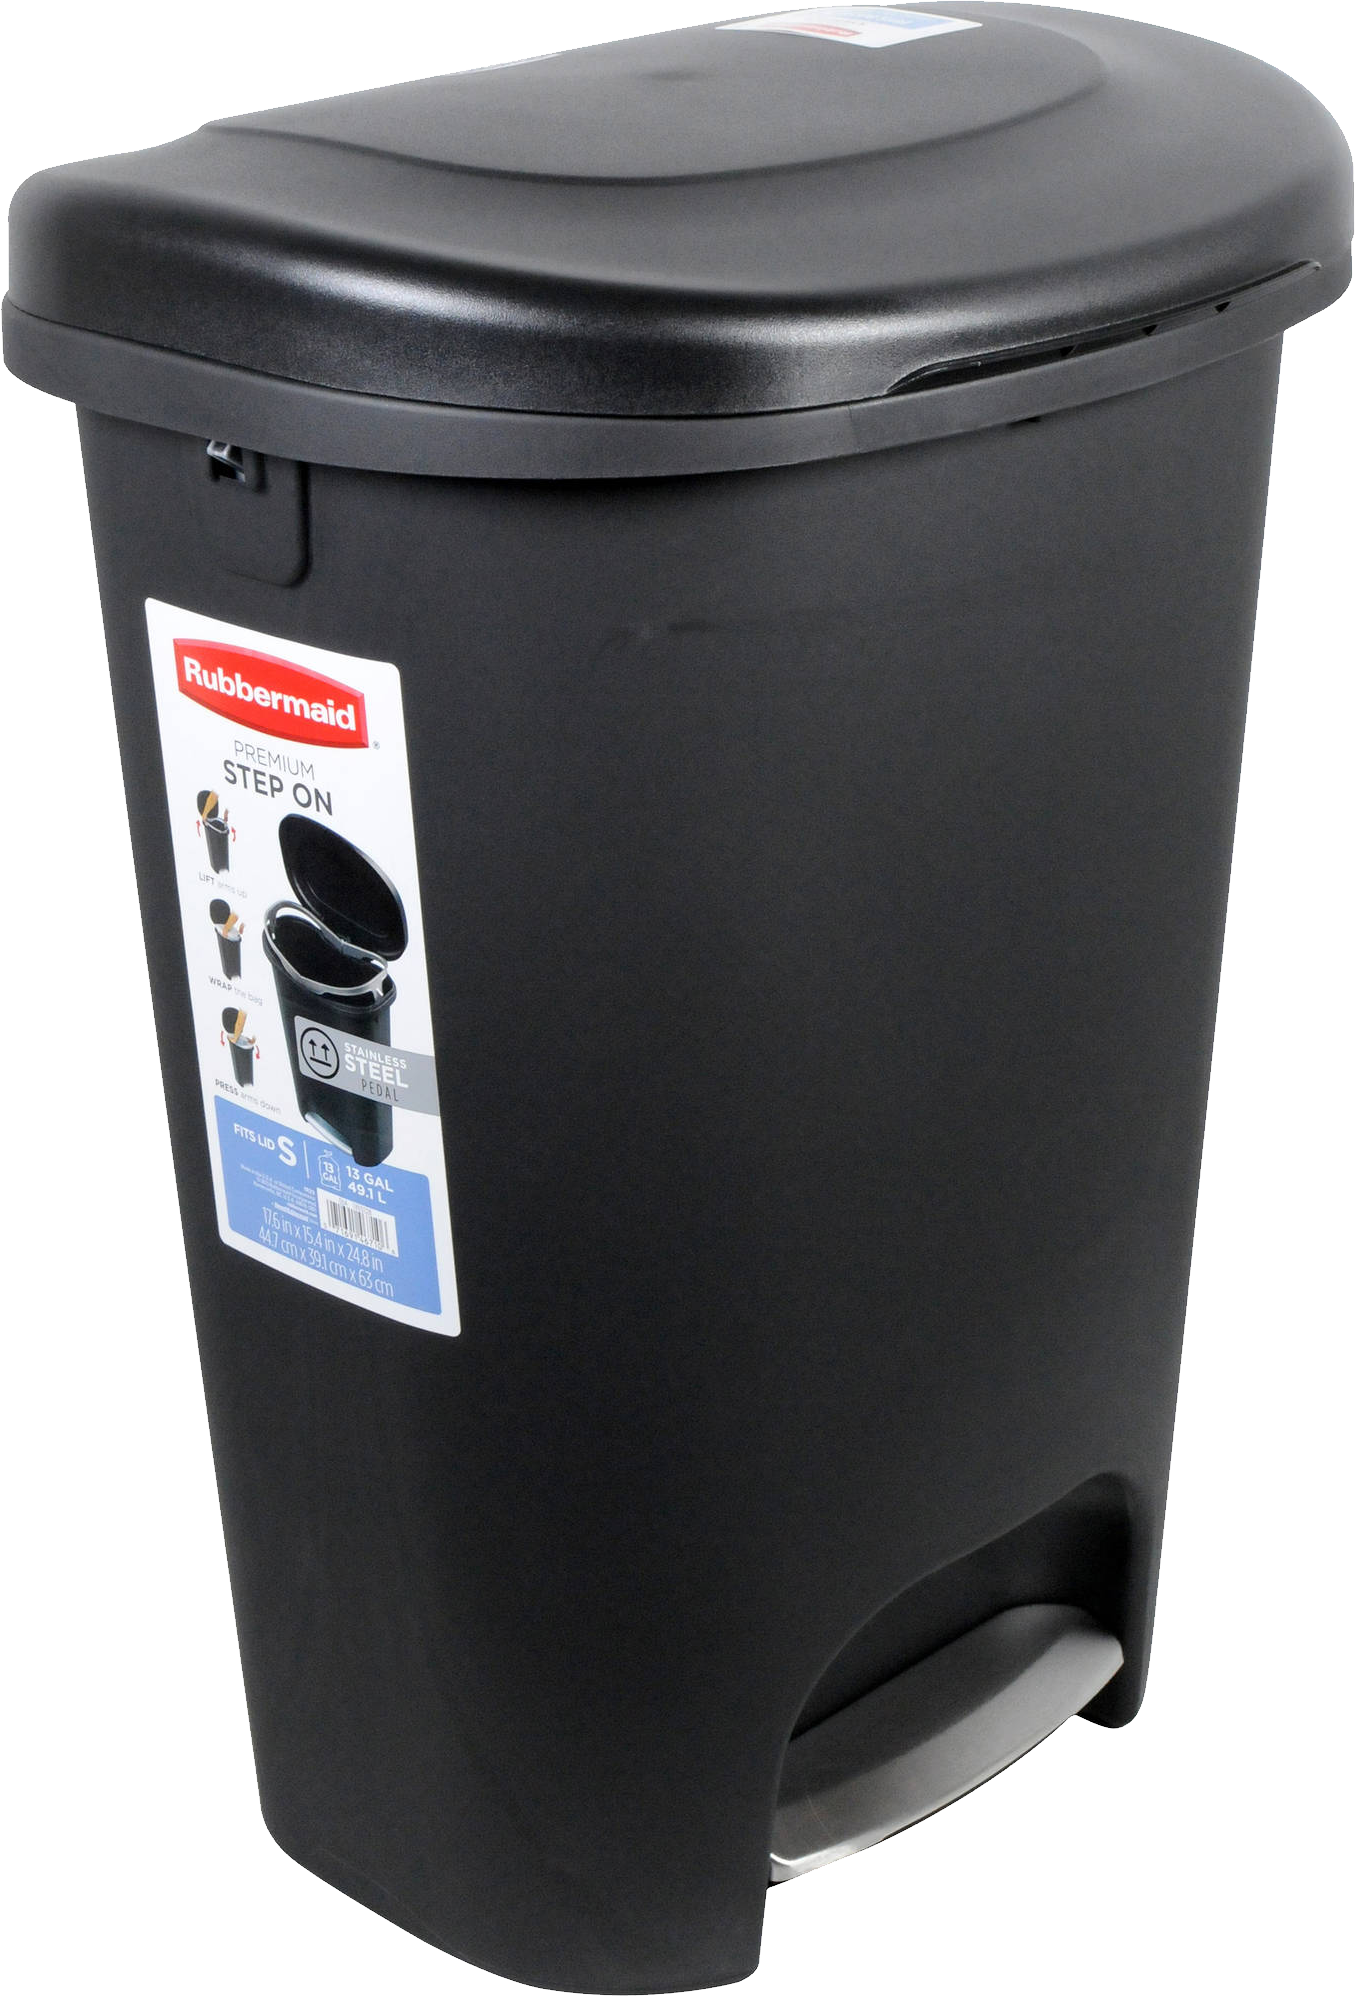 Trash Can Png - Trash Can, Transparent background PNG HD thumbnail